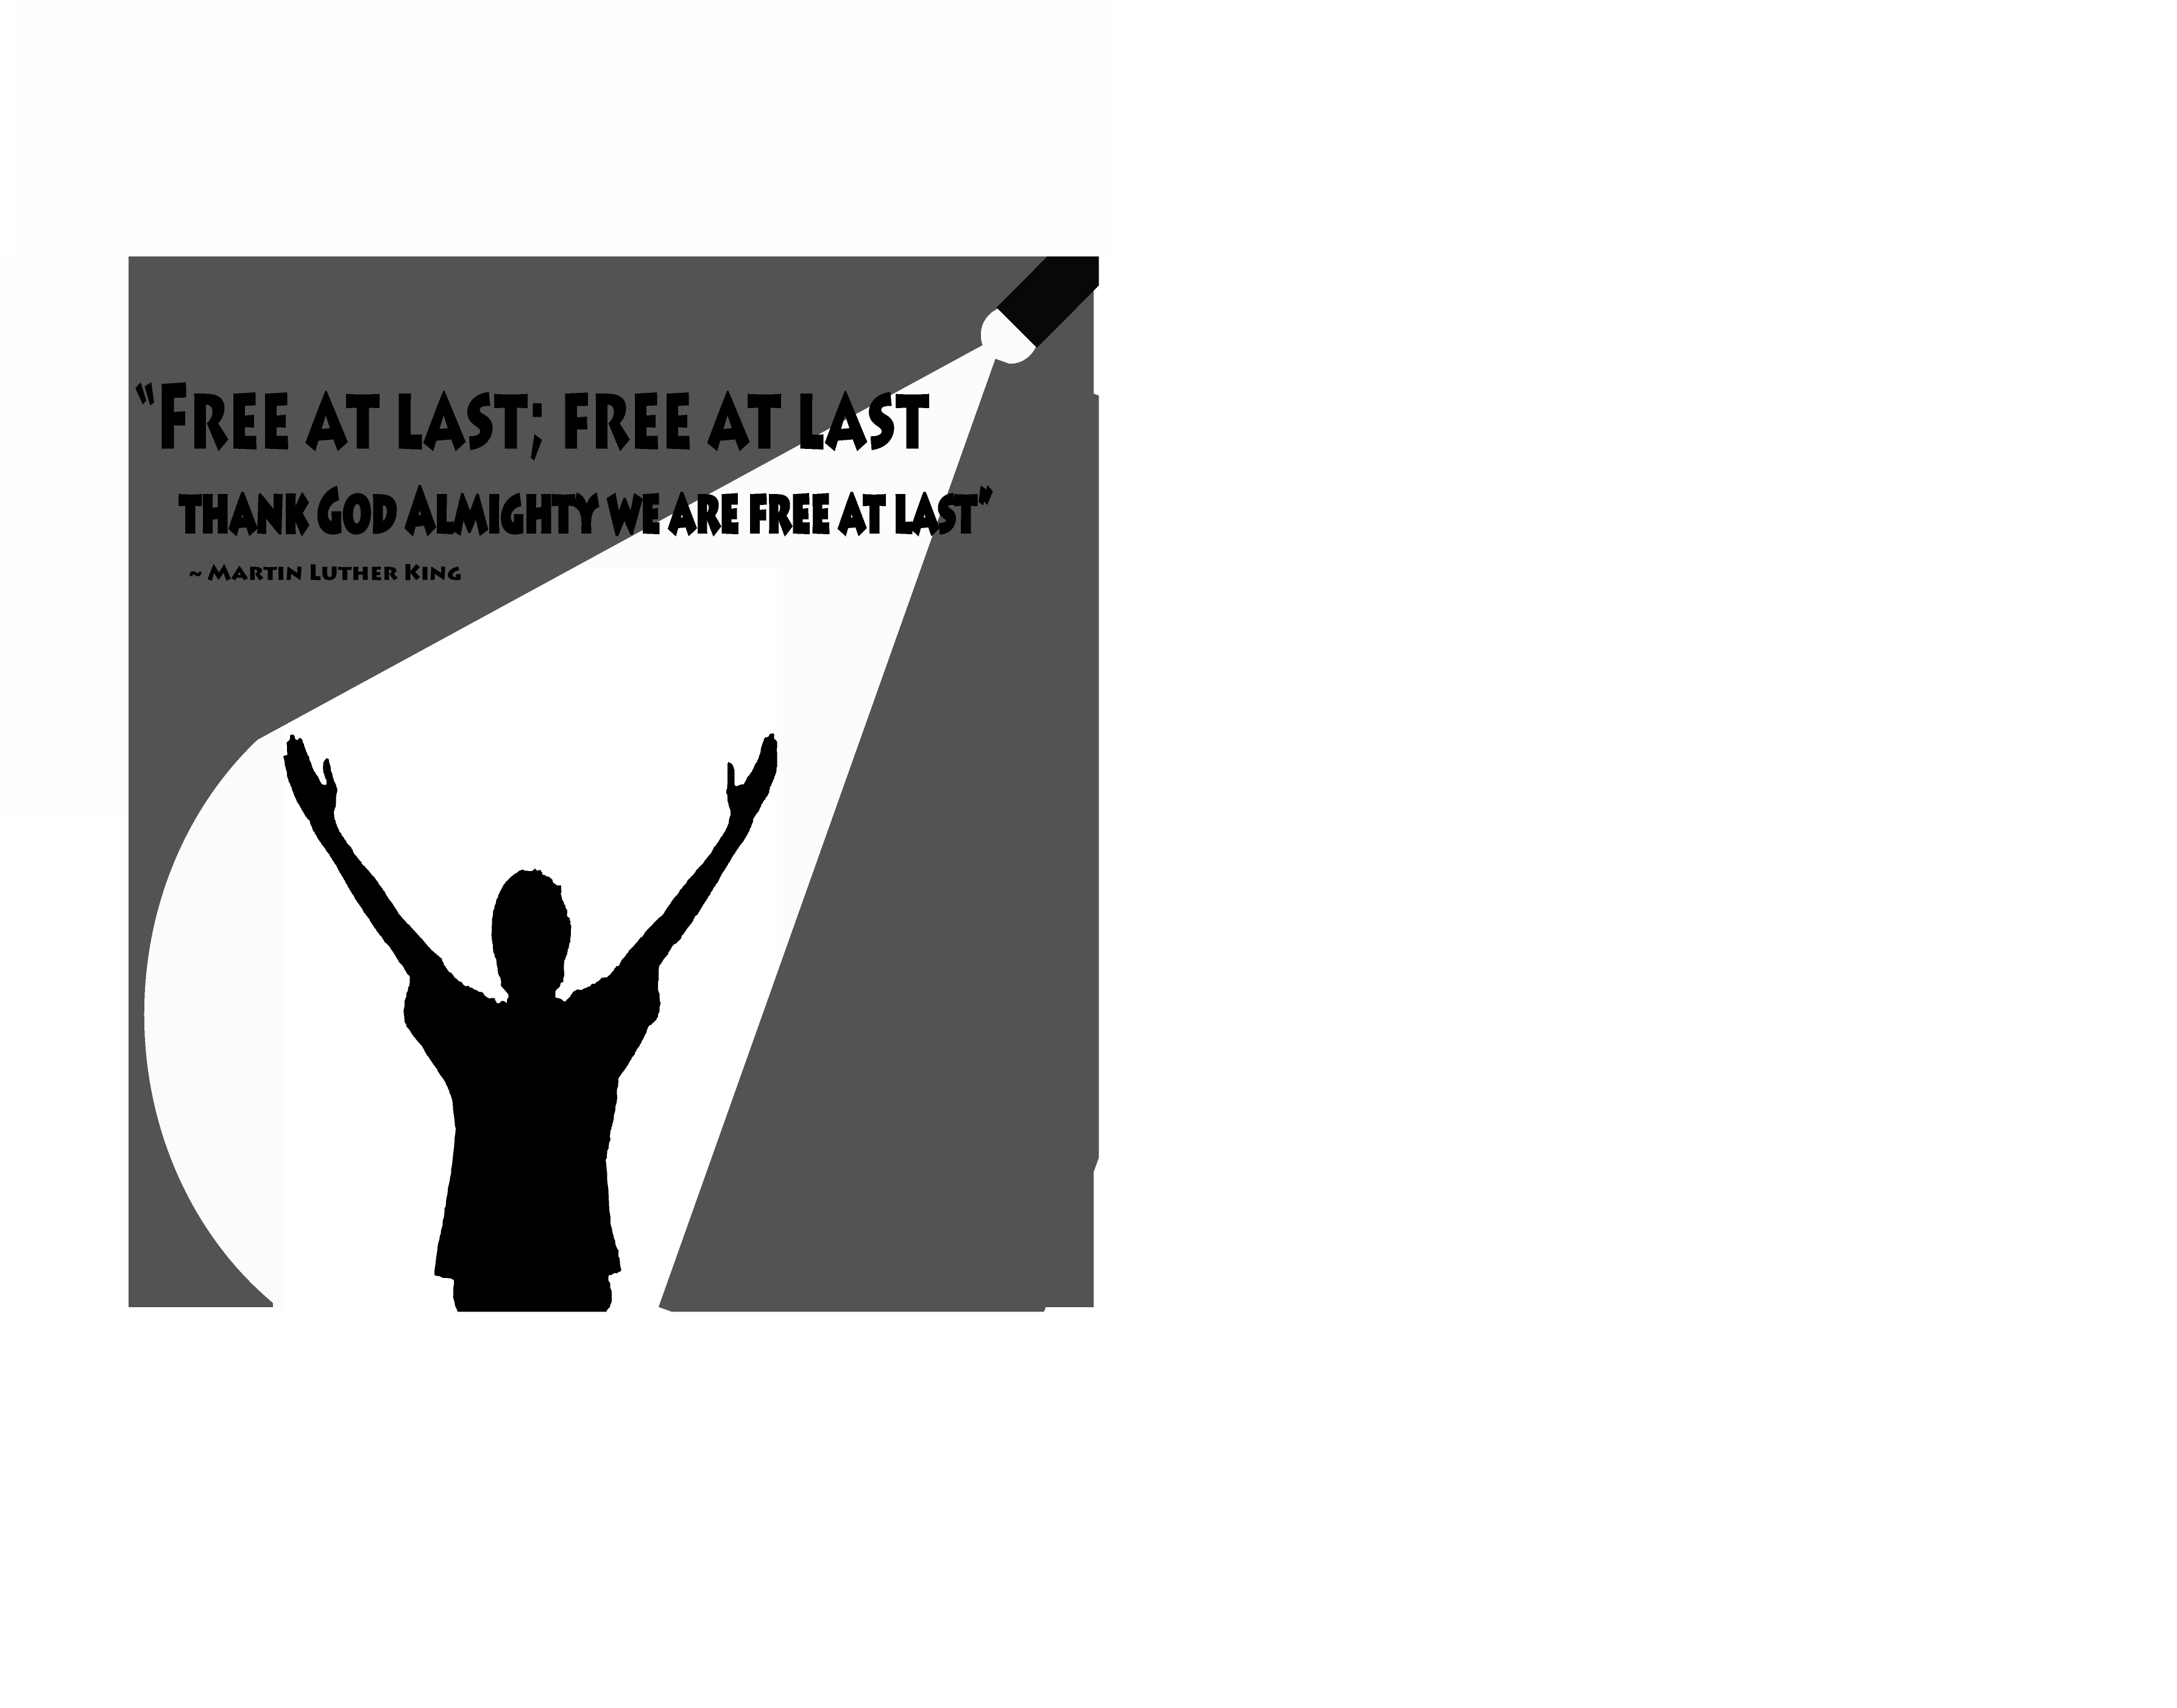 Graphic design nickglauth s. Mlk clipart free at last